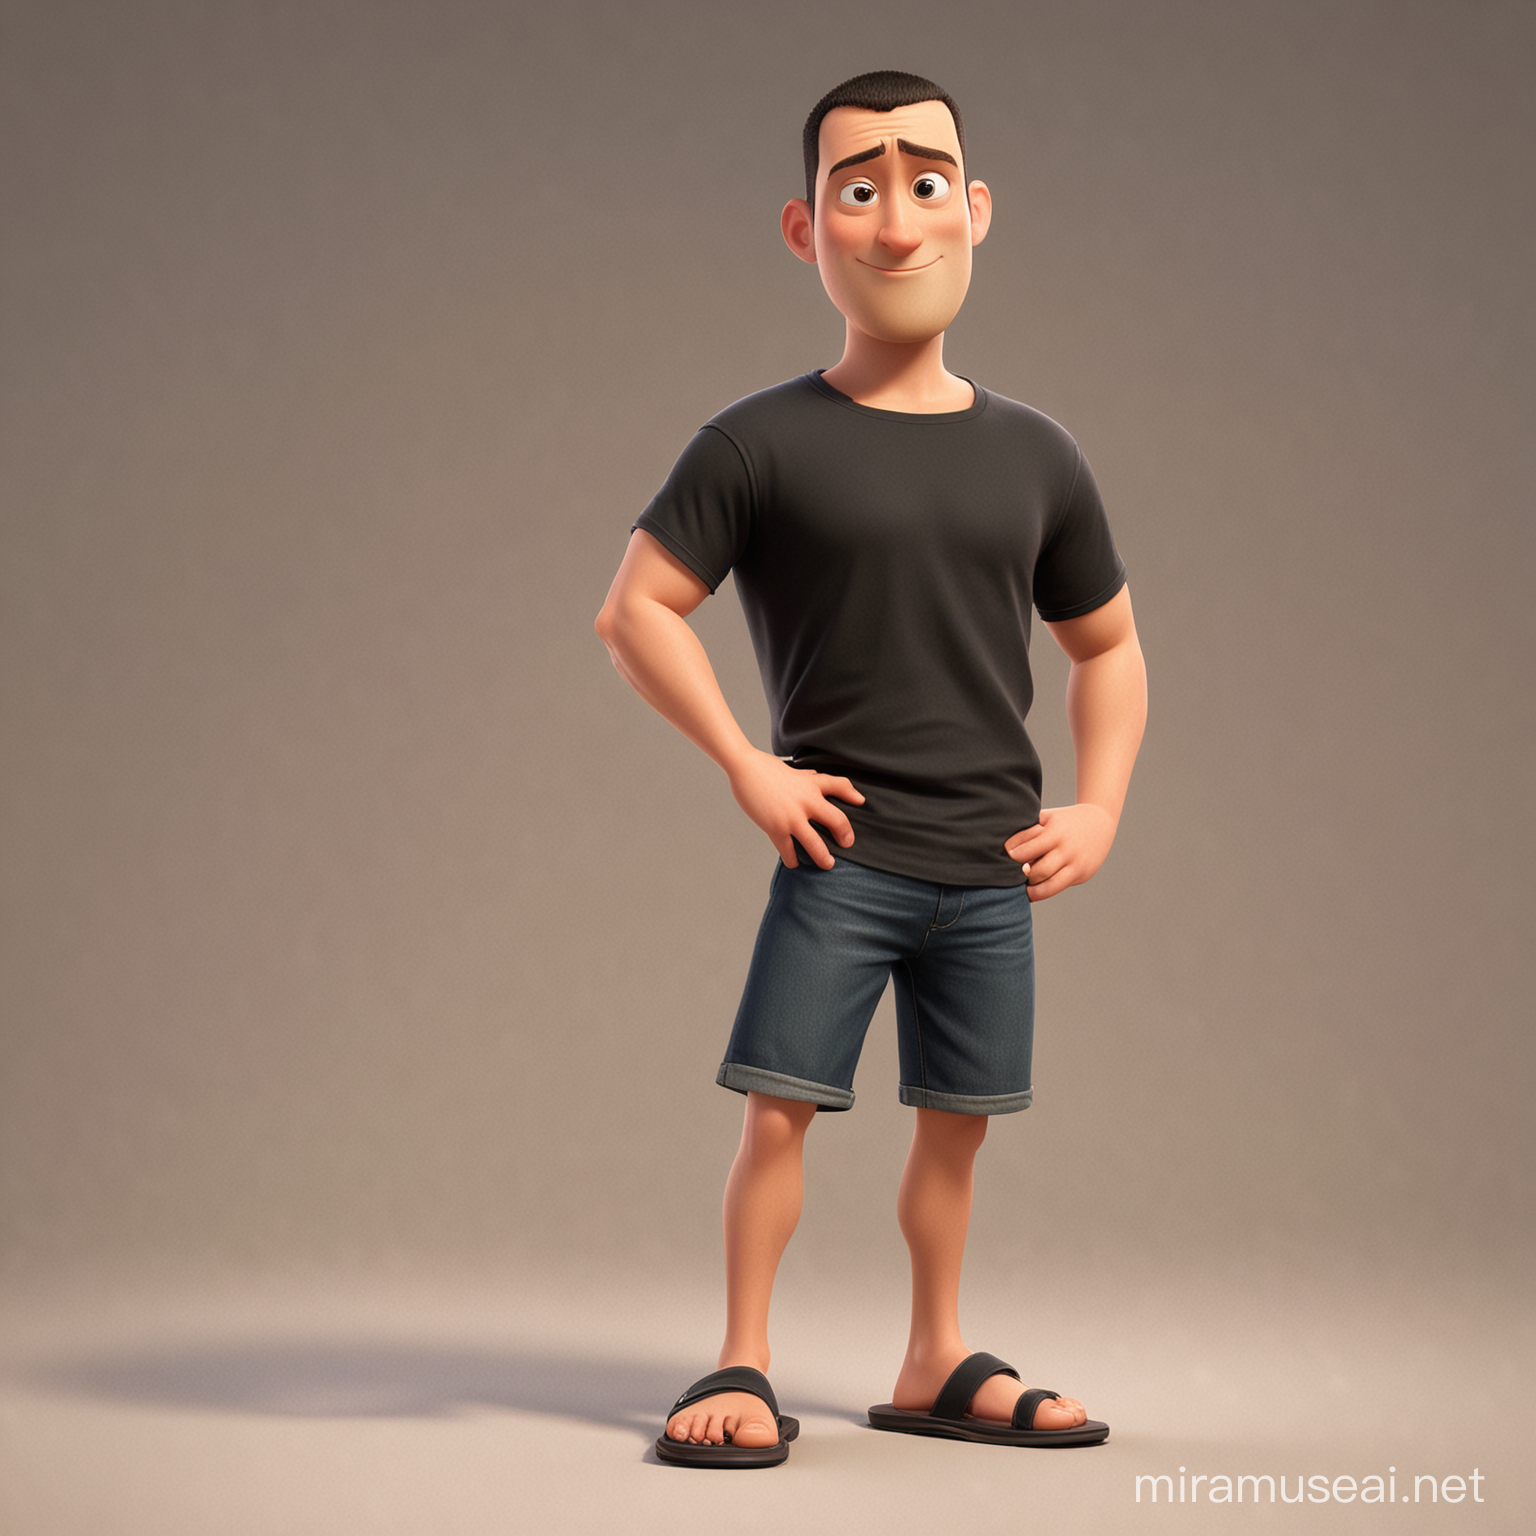 Marvels, 40 year old man, full body, wearing black t-shirt, short black hair, buzz cut, little light brown eyes, small eyebrow, pixar style, cartoon characters, full body standing up, wearing sandals